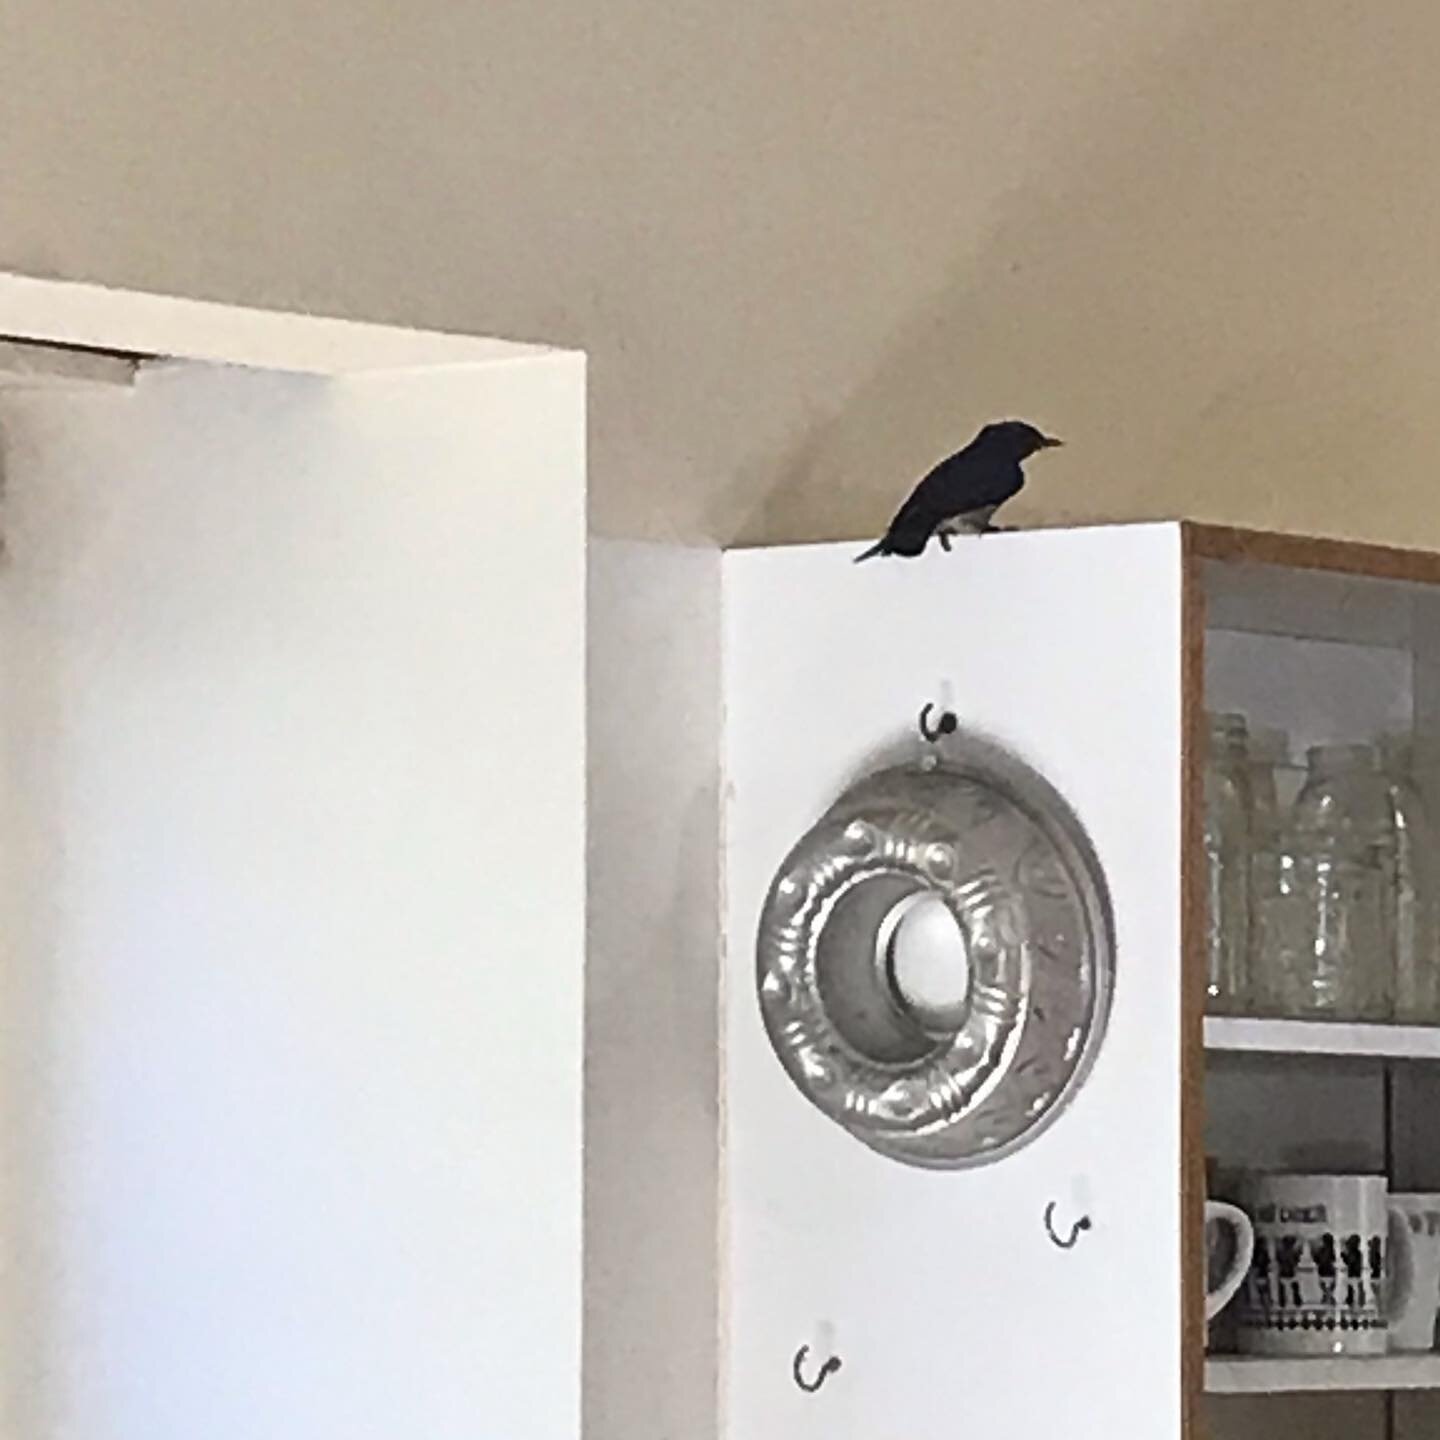 Bluebird rescued from the woodstove yesterday and another one rescued today. Many comings and goings at the house as of late